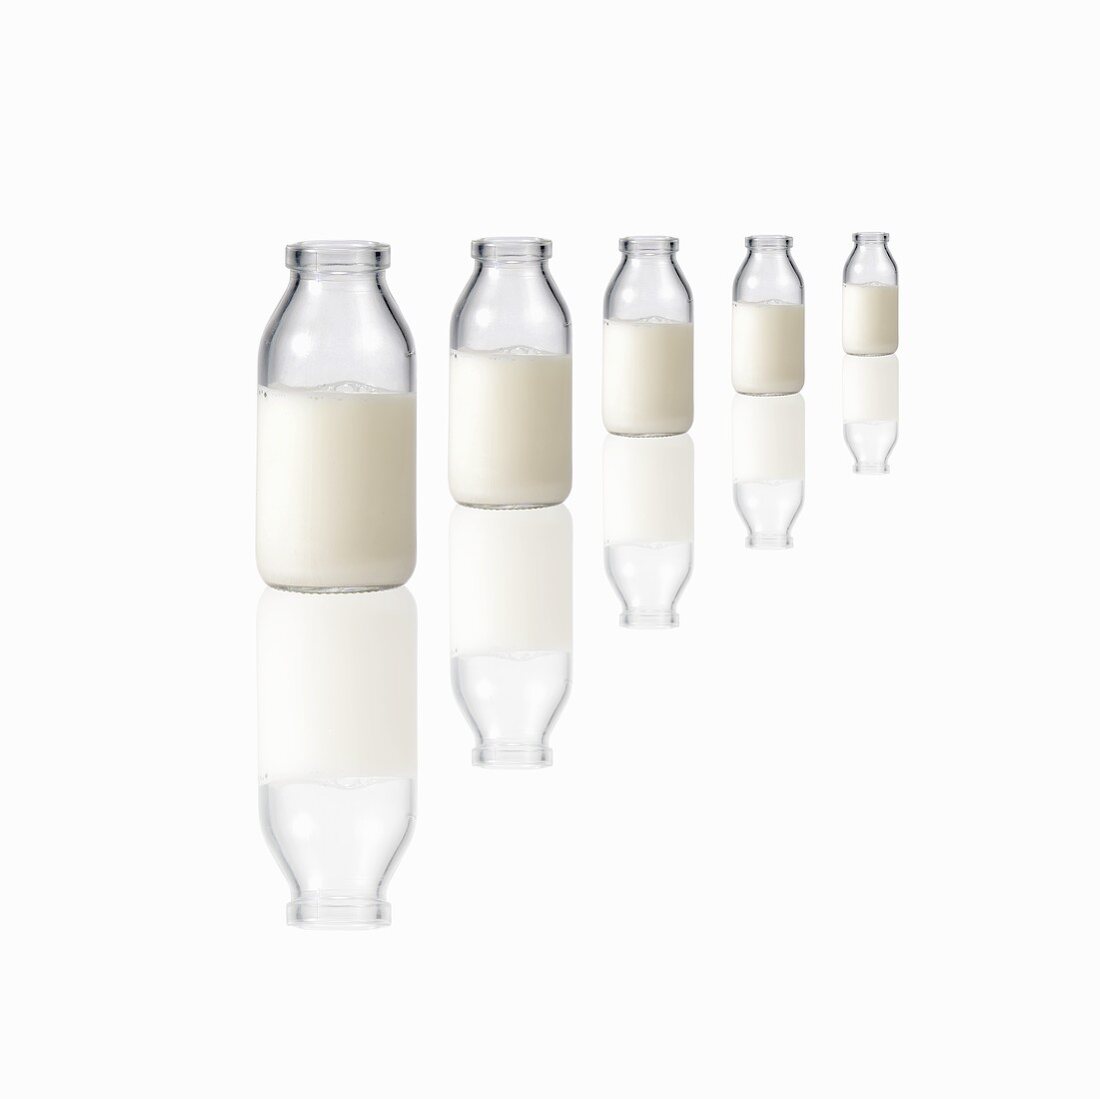 Five milk bottles on a reflecting surface